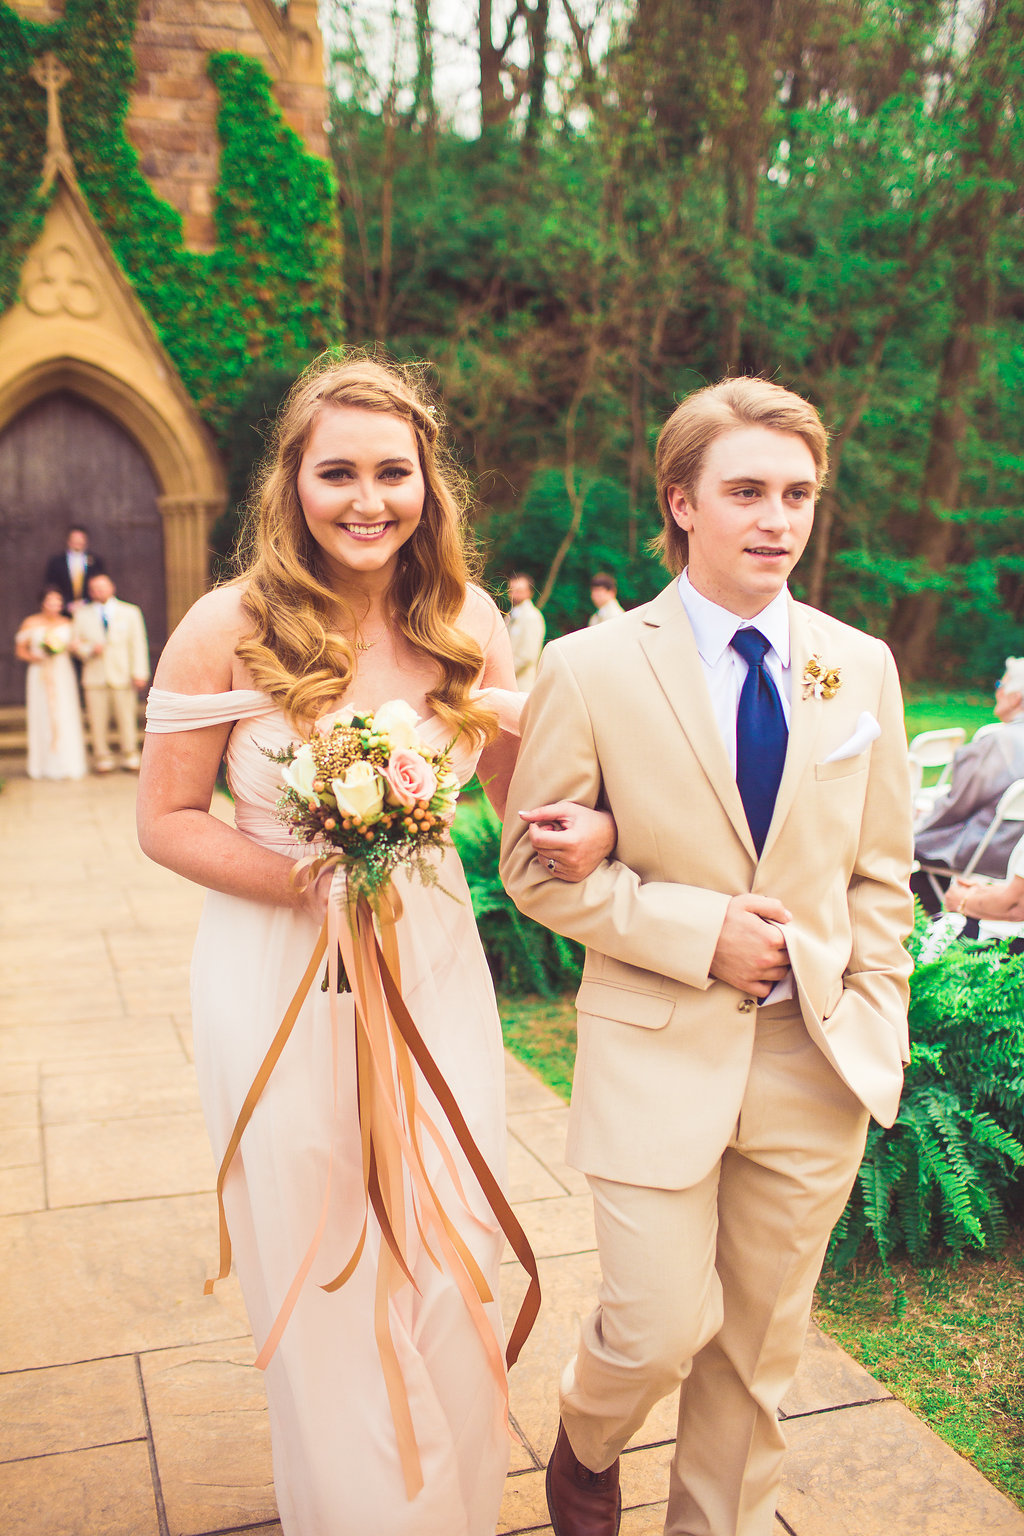 Wedding Photograph Of Woman in Peach Dress and Man in Light Brown Suit Walking Down The Aisle Los Angeles